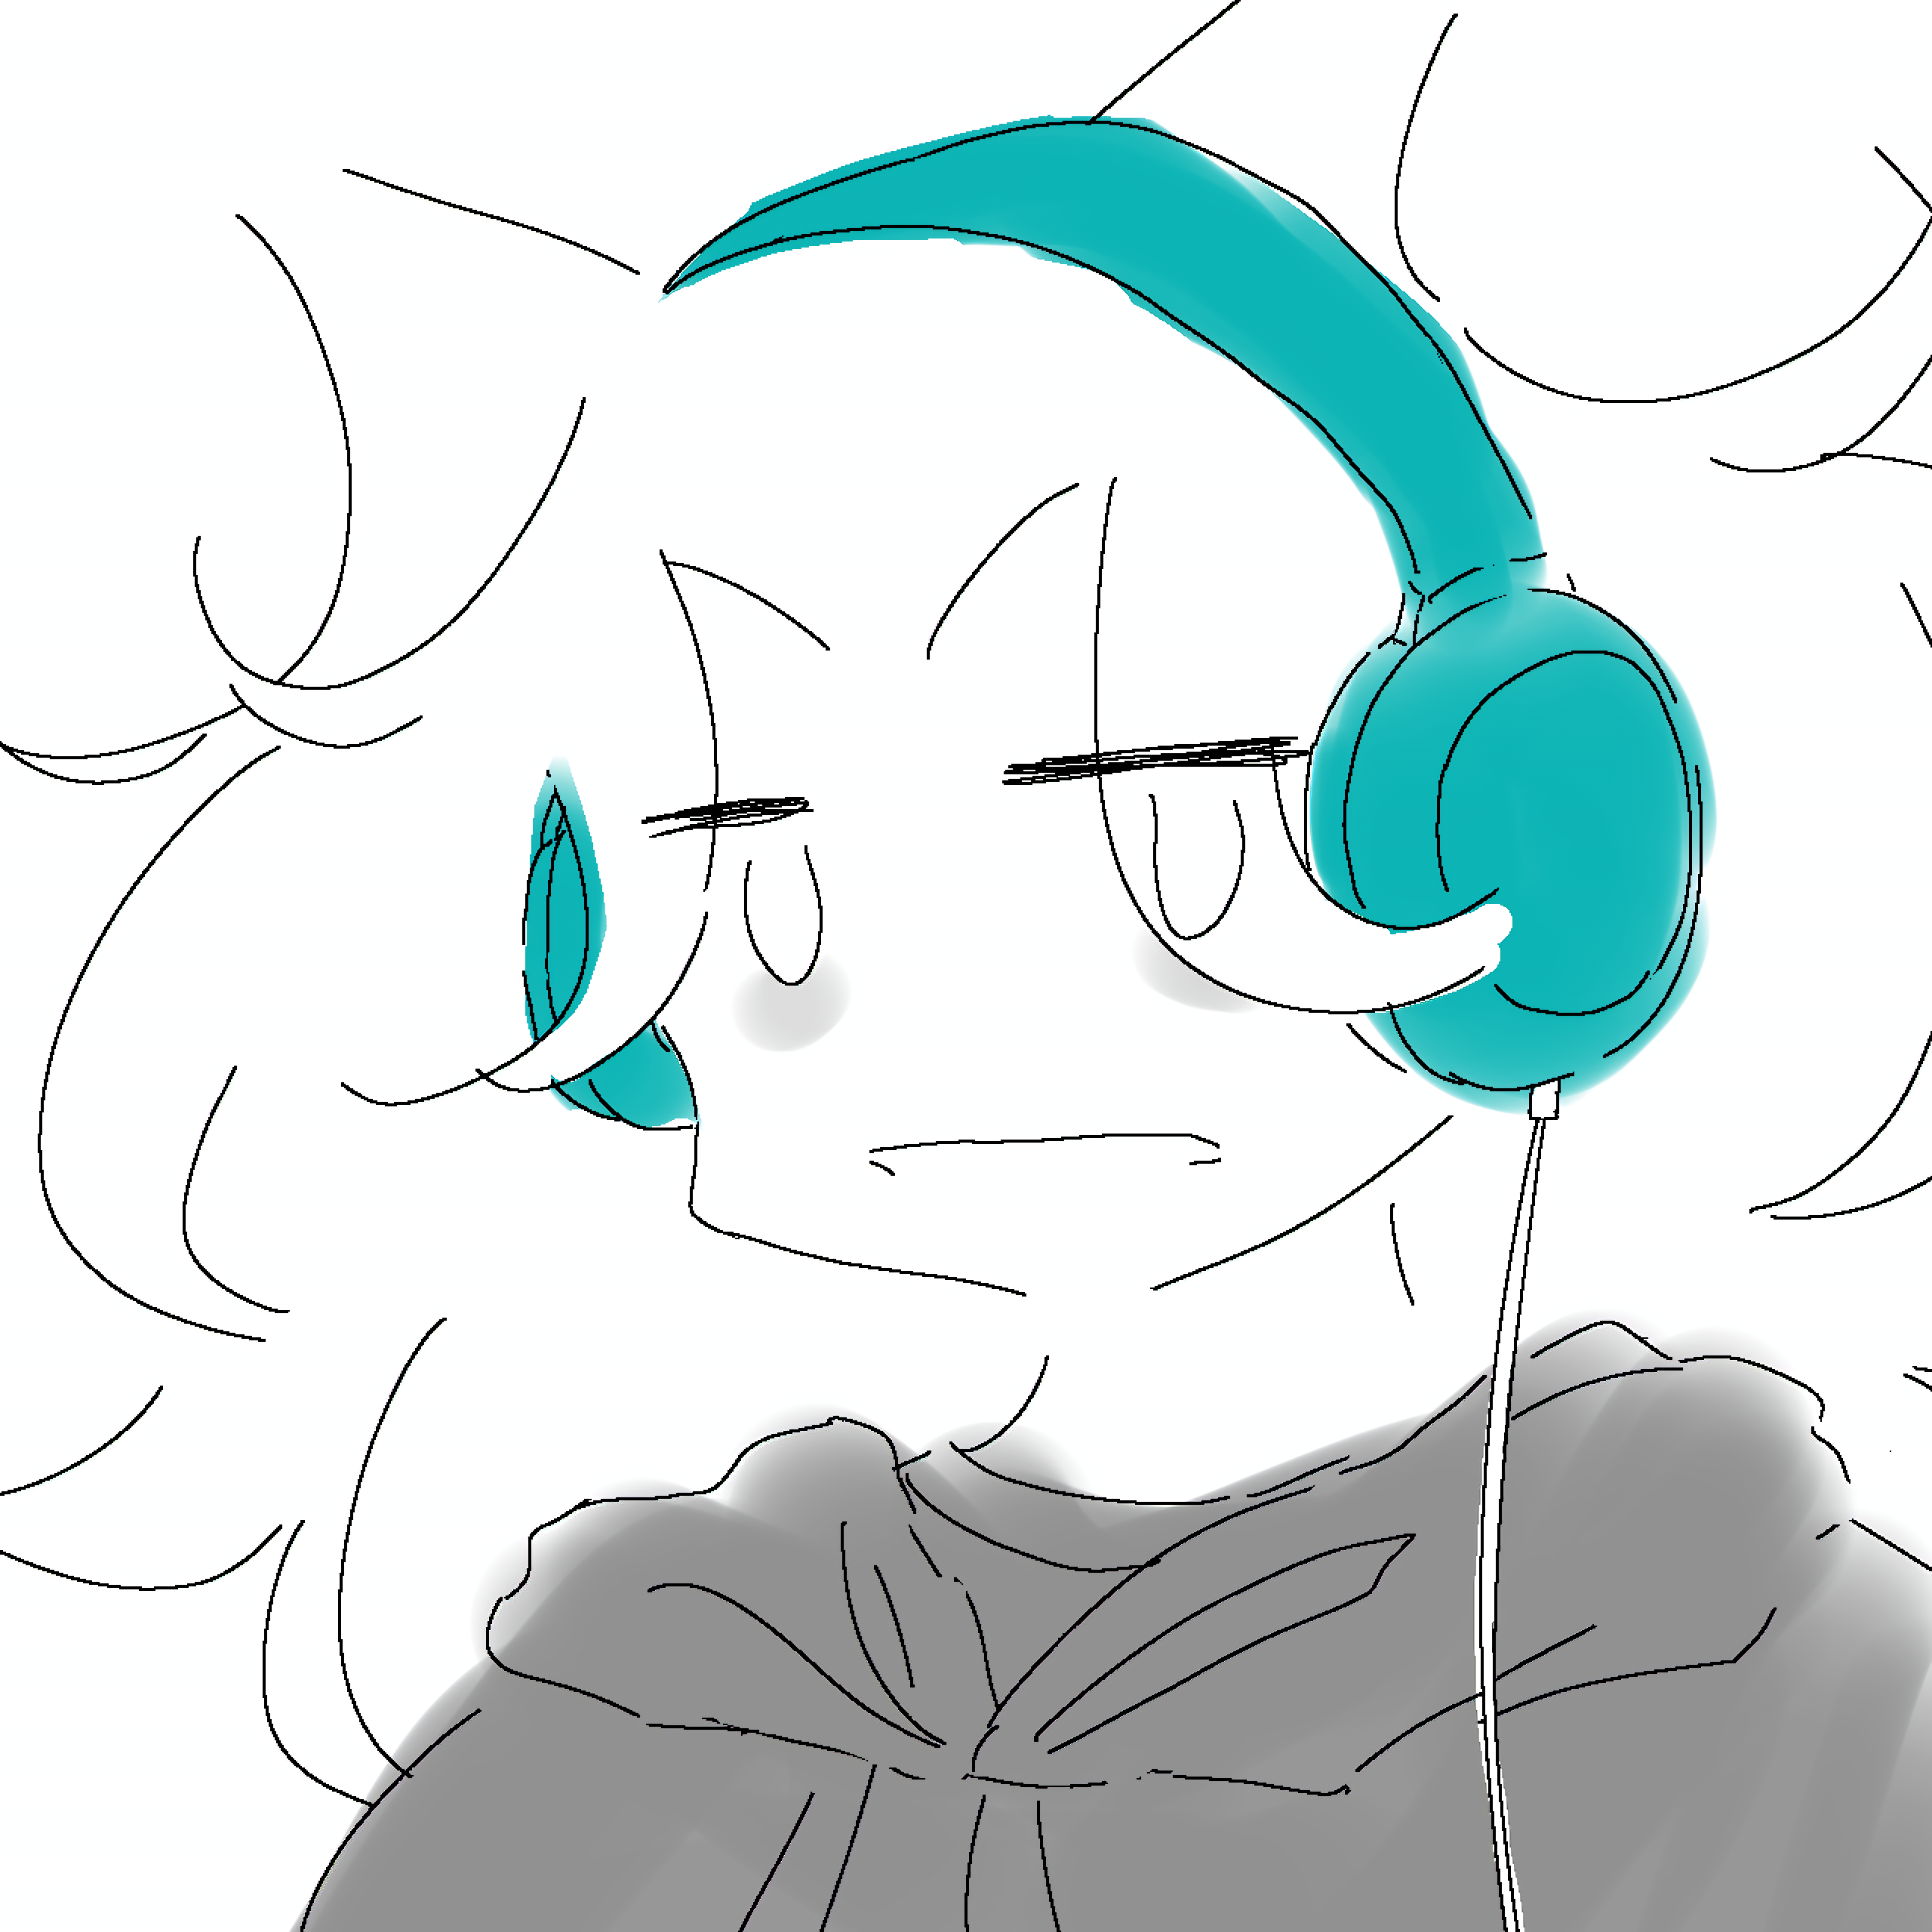 a drawing of meek, an individual with curly hair, dark eye circles, blue headphones, and an all black tshirt and jacket. they are looking at the audience with a neutral face